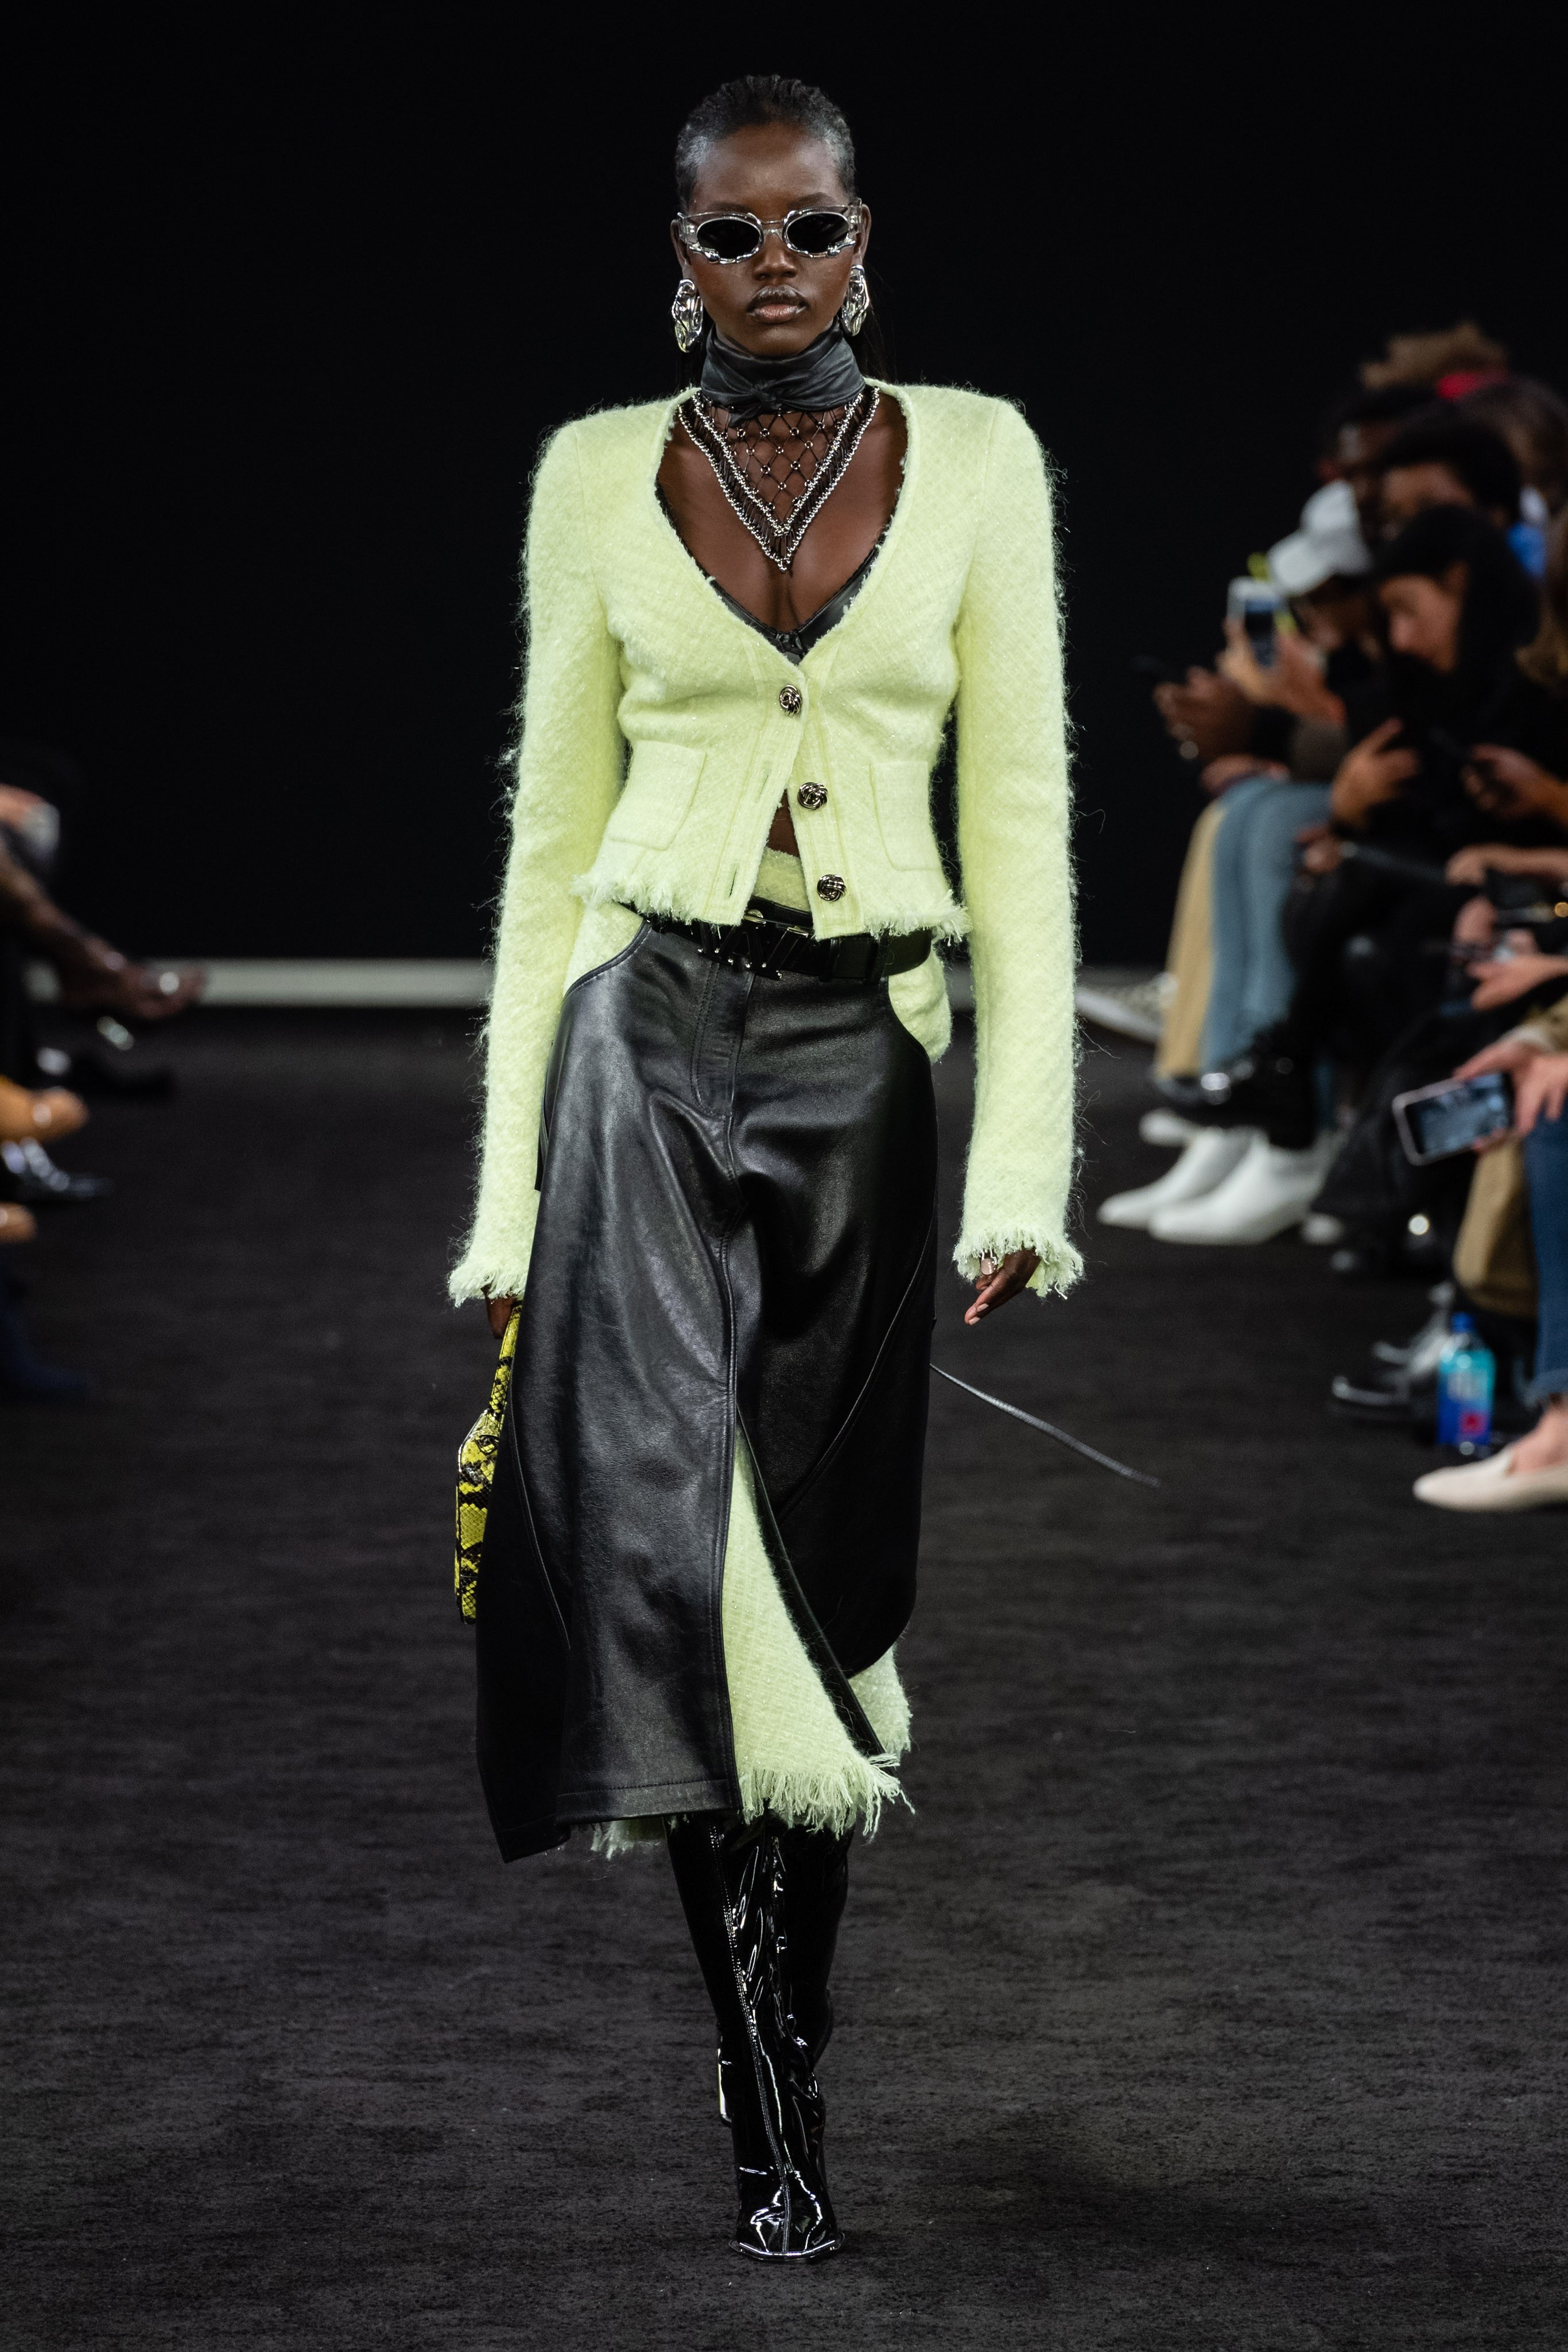 A Week in Pre-Fall Fashion: Alexander Wang Collection 2, Versace